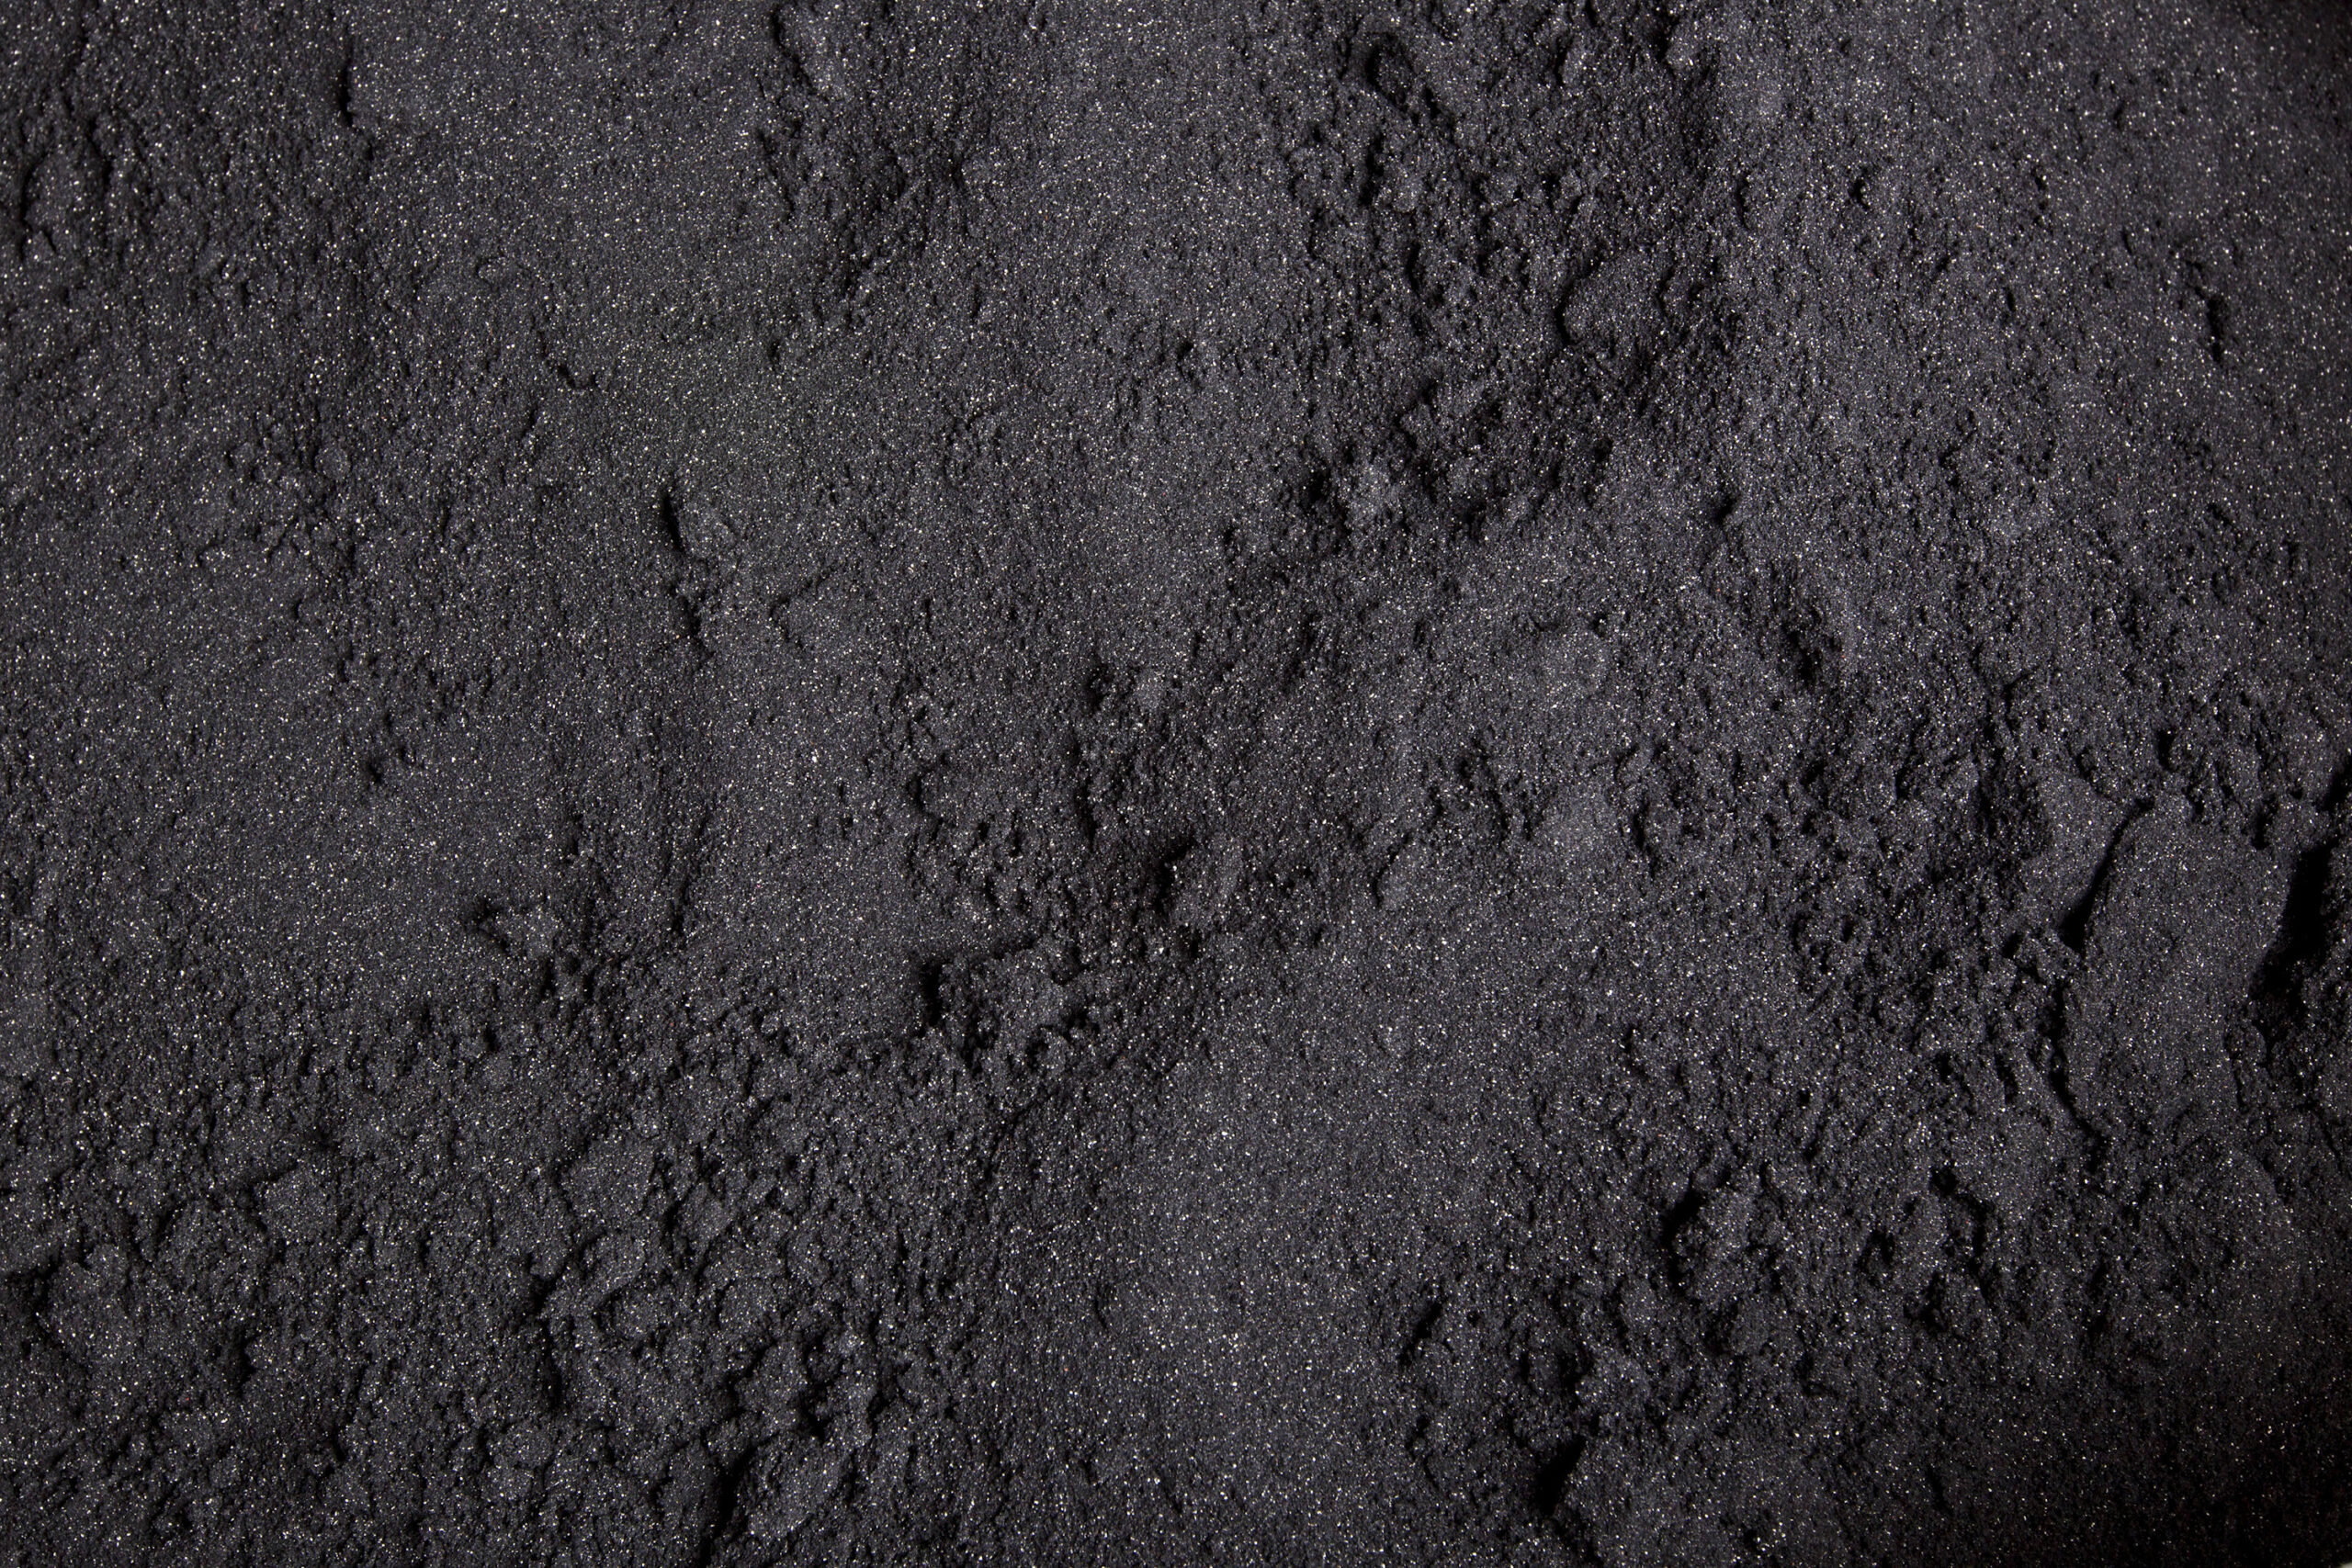 Crumb rubber, made of recycled tires